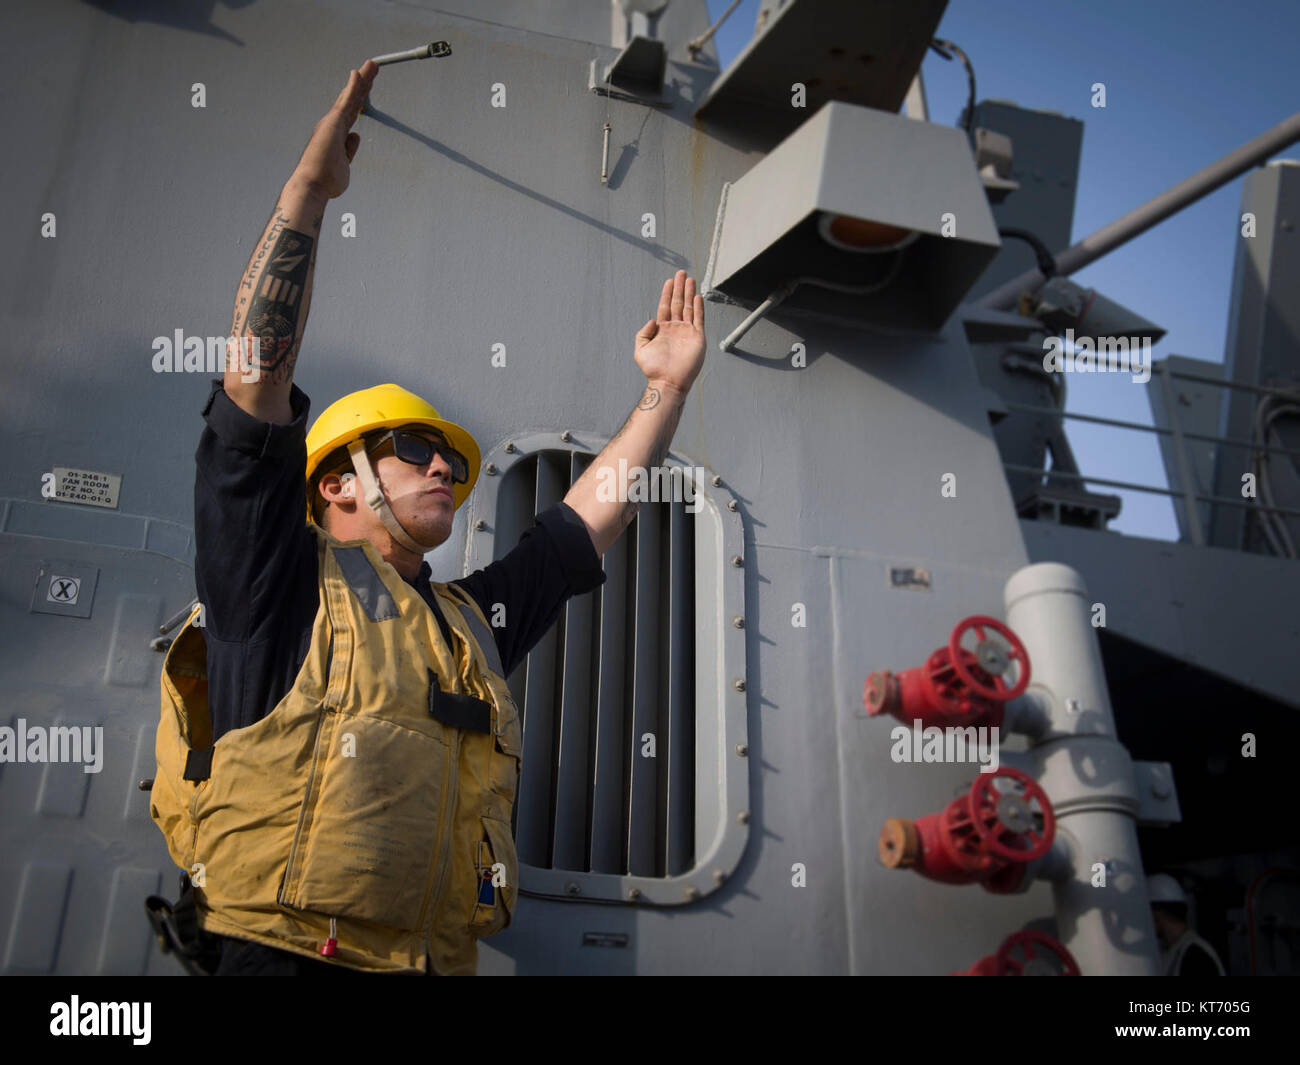 Boatswain’s Mate 2nd Class Matthew C. Robertson signals to the USNS Alan Shepard (T-AKE 3) during a replenishment-at-sea aboard the Arleigh Burke-class guided-missile destroyer USS Preble (DDG 88). Preble is deployed with the Theodore Roosevelt Carrier Strike Group to the U.S. 5th Fleet area of operations in support of maritime security operations to reassure allies and partners and preserve the freedom of navigation and the free flow of commerce in the region. (U.S. Navy Stock Photo